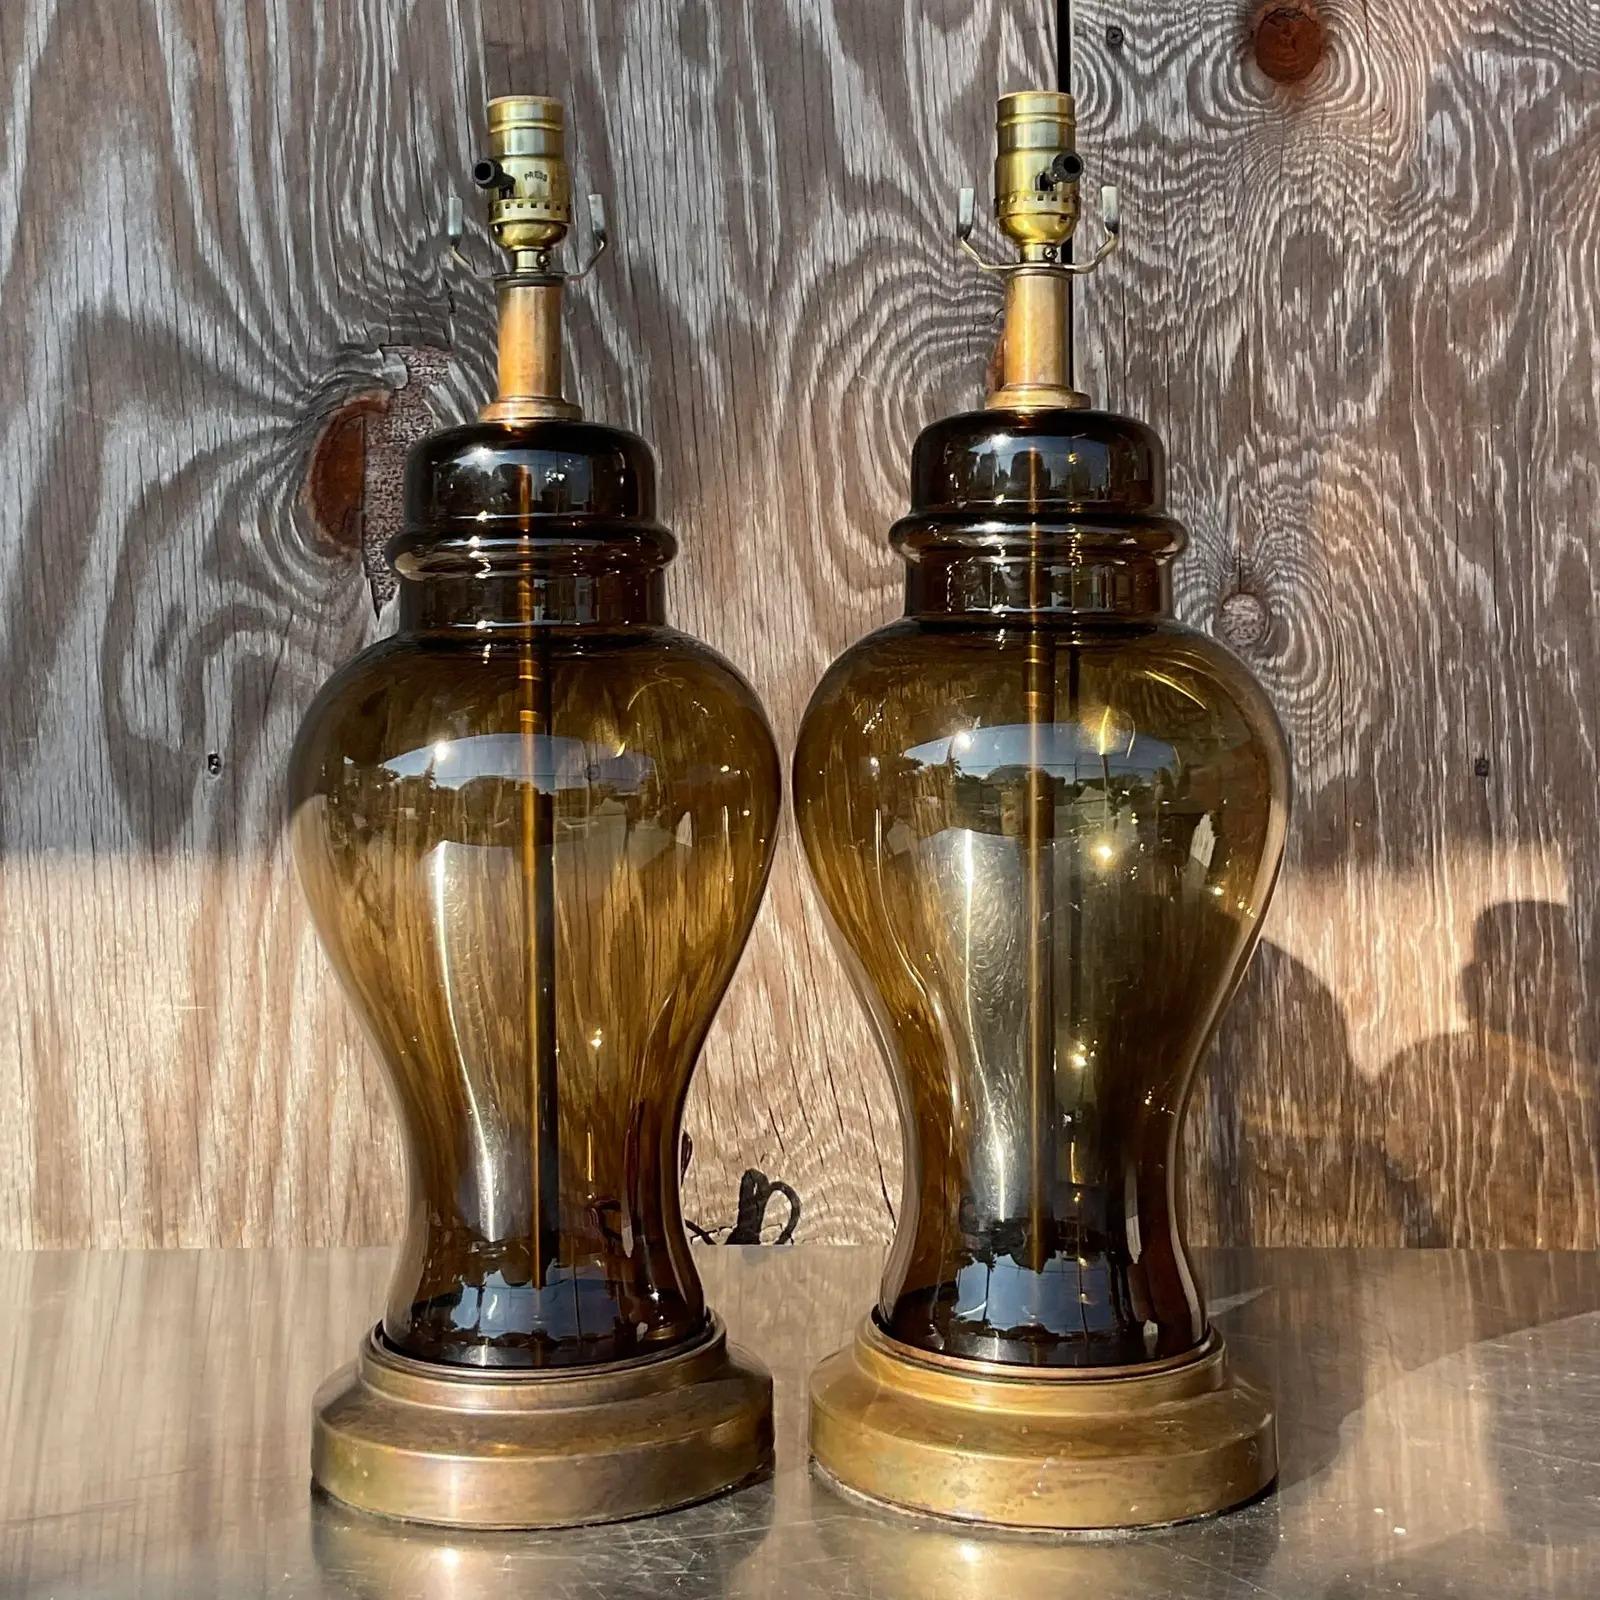 North American Vintage Boho Smoked Glass Ginger Jar Lamps - a Pair For Sale